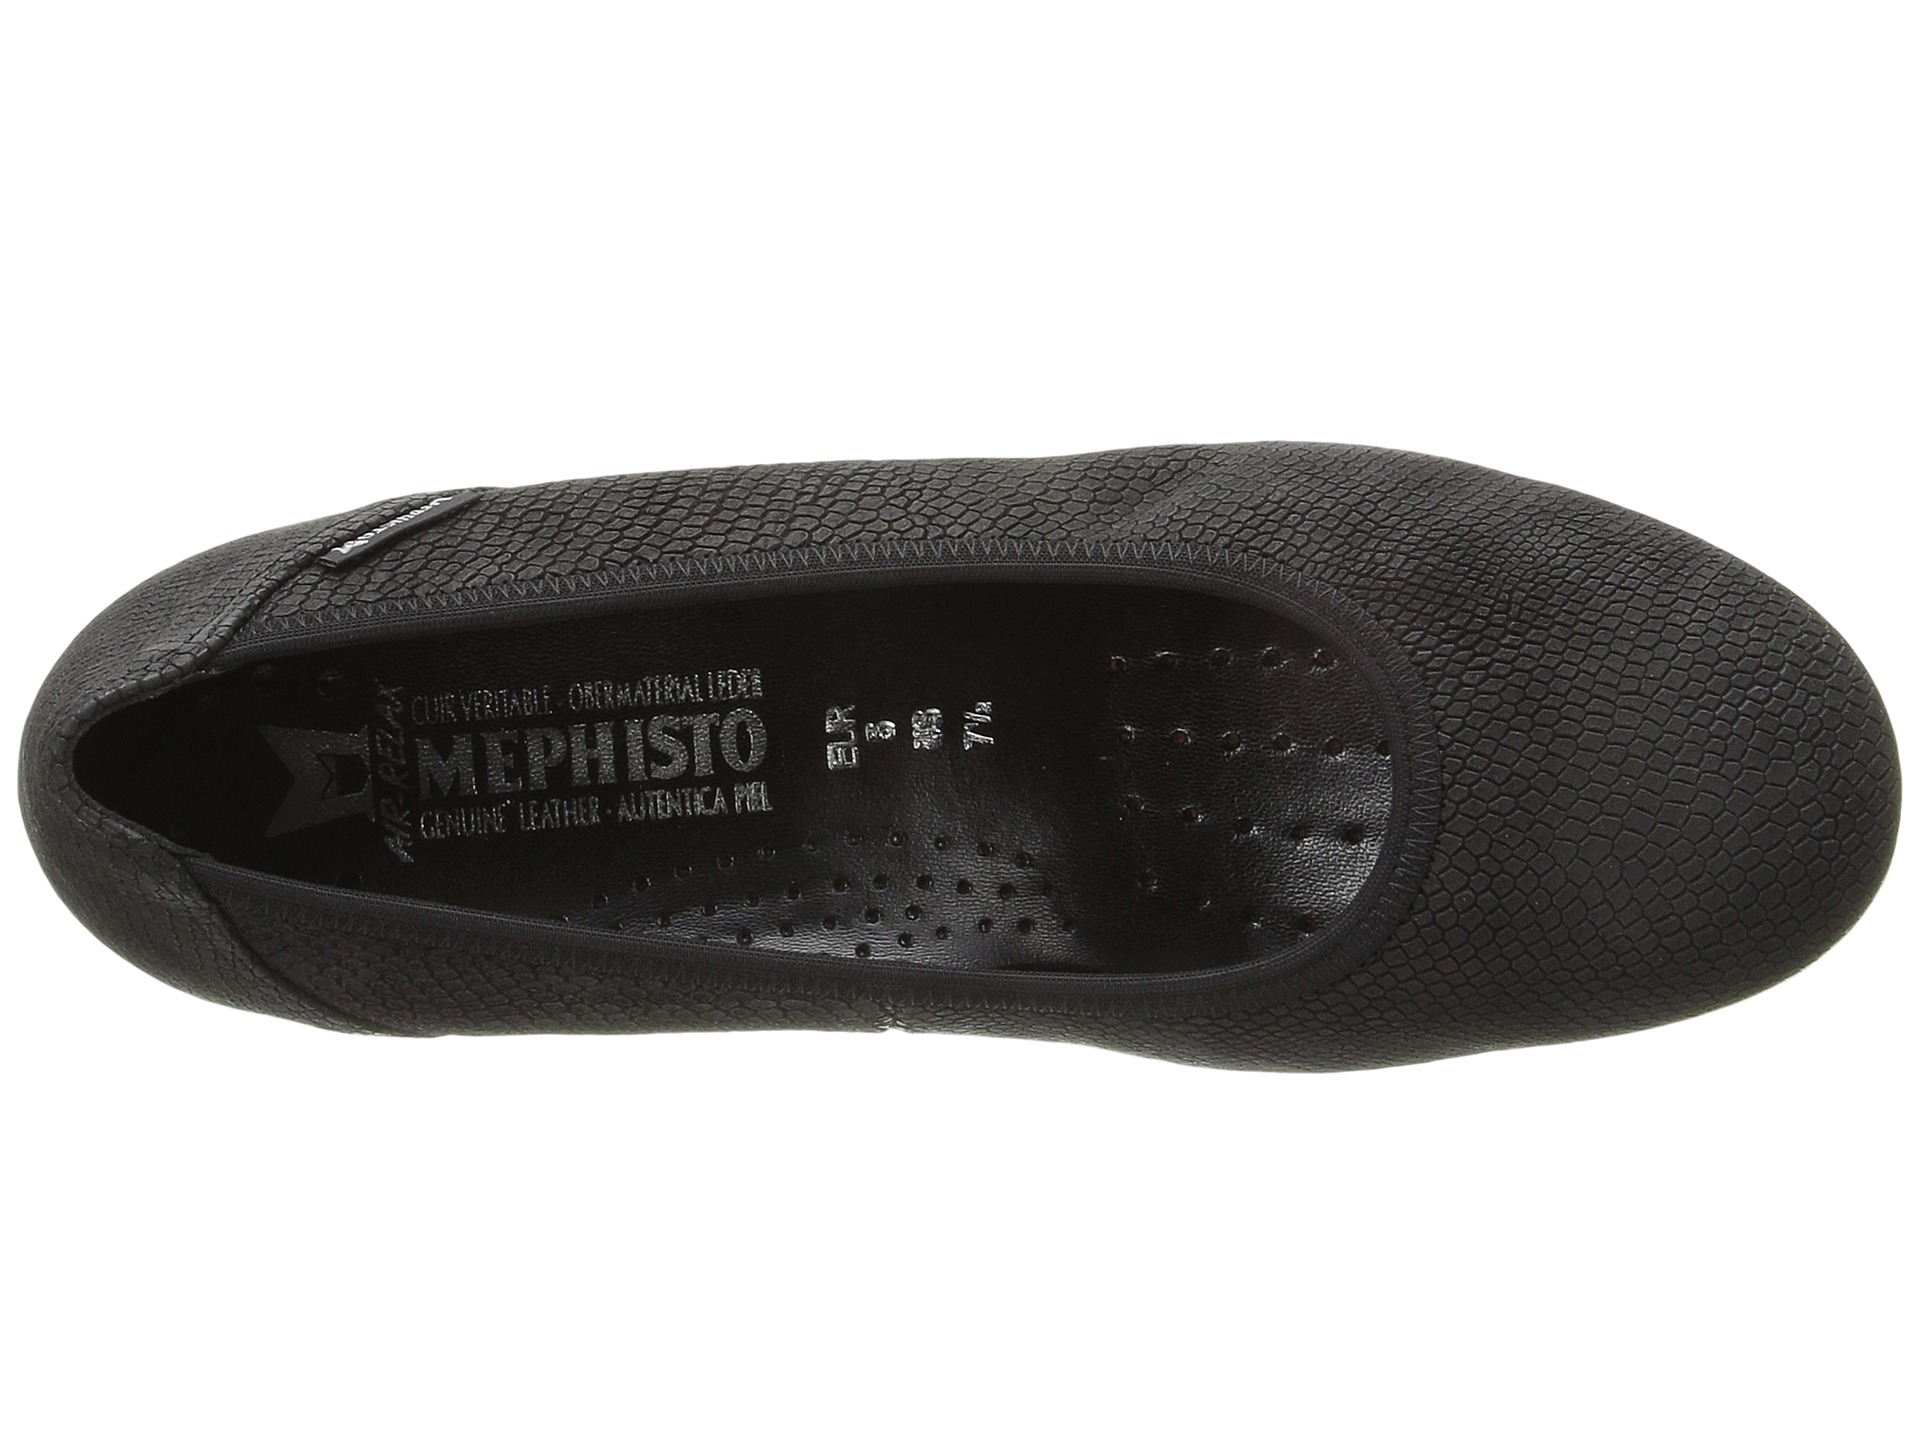 Mephisto Emilie Black Queen - Zappos.com Free Shipping BOTH Ways